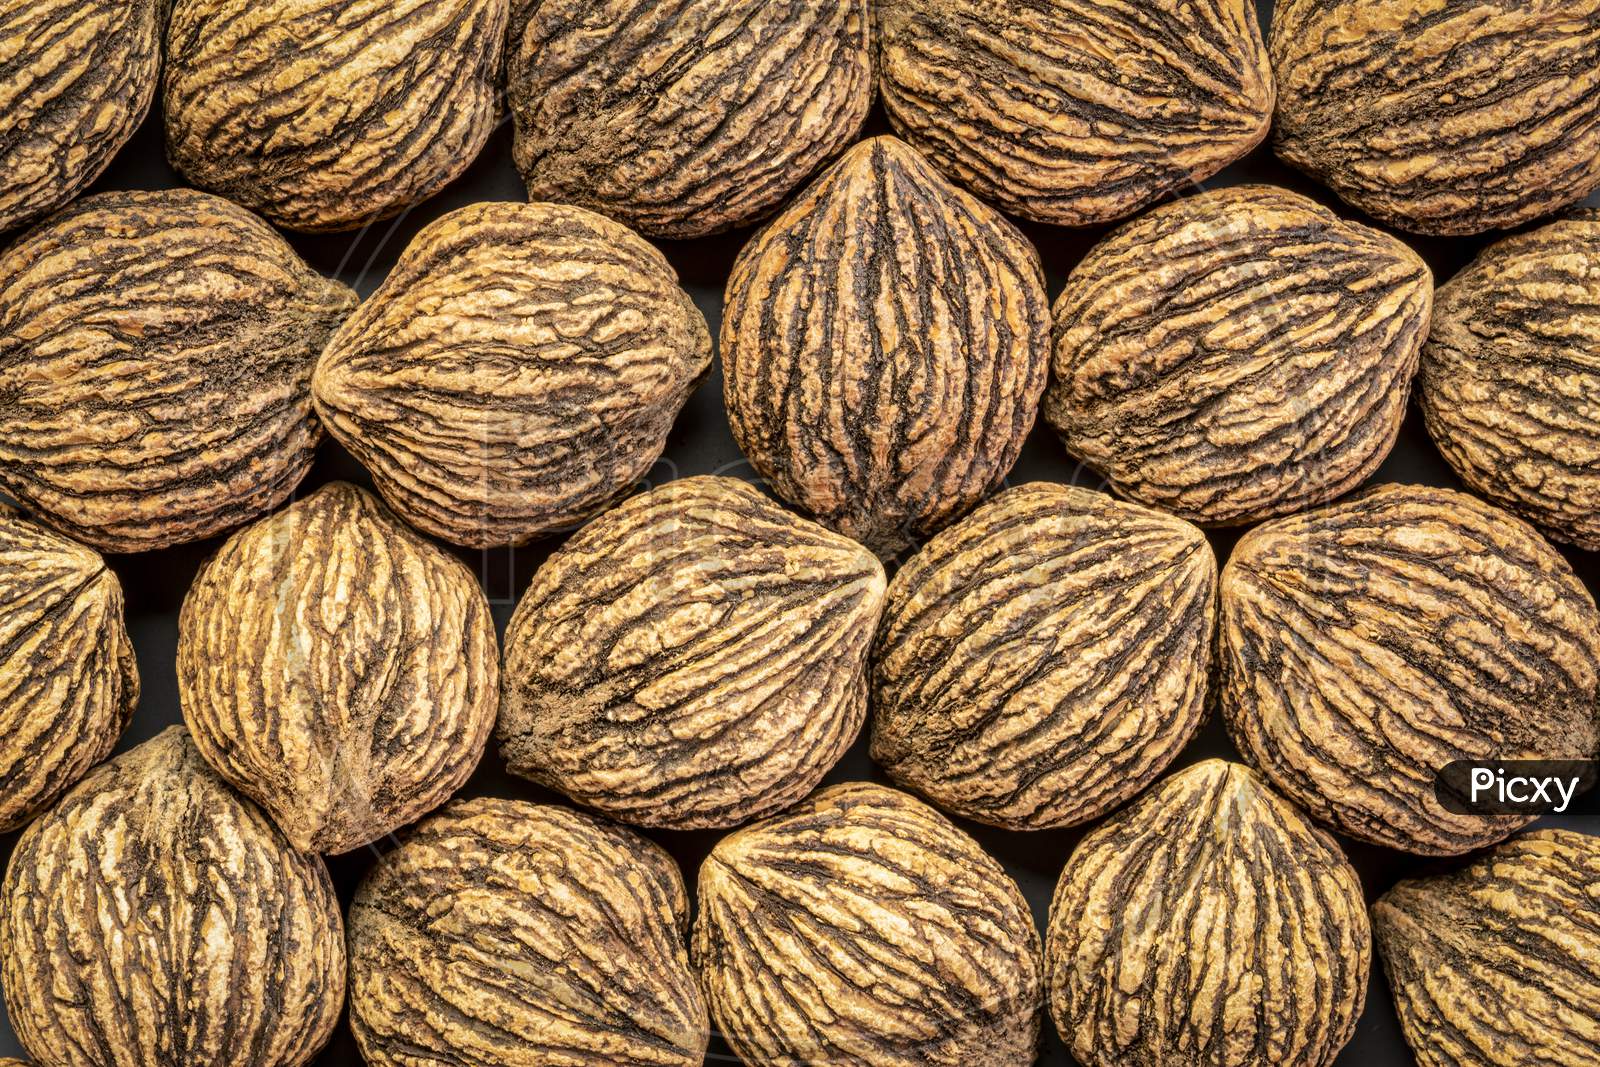 Abstract Background Of Organic Black Walnuts In Shells